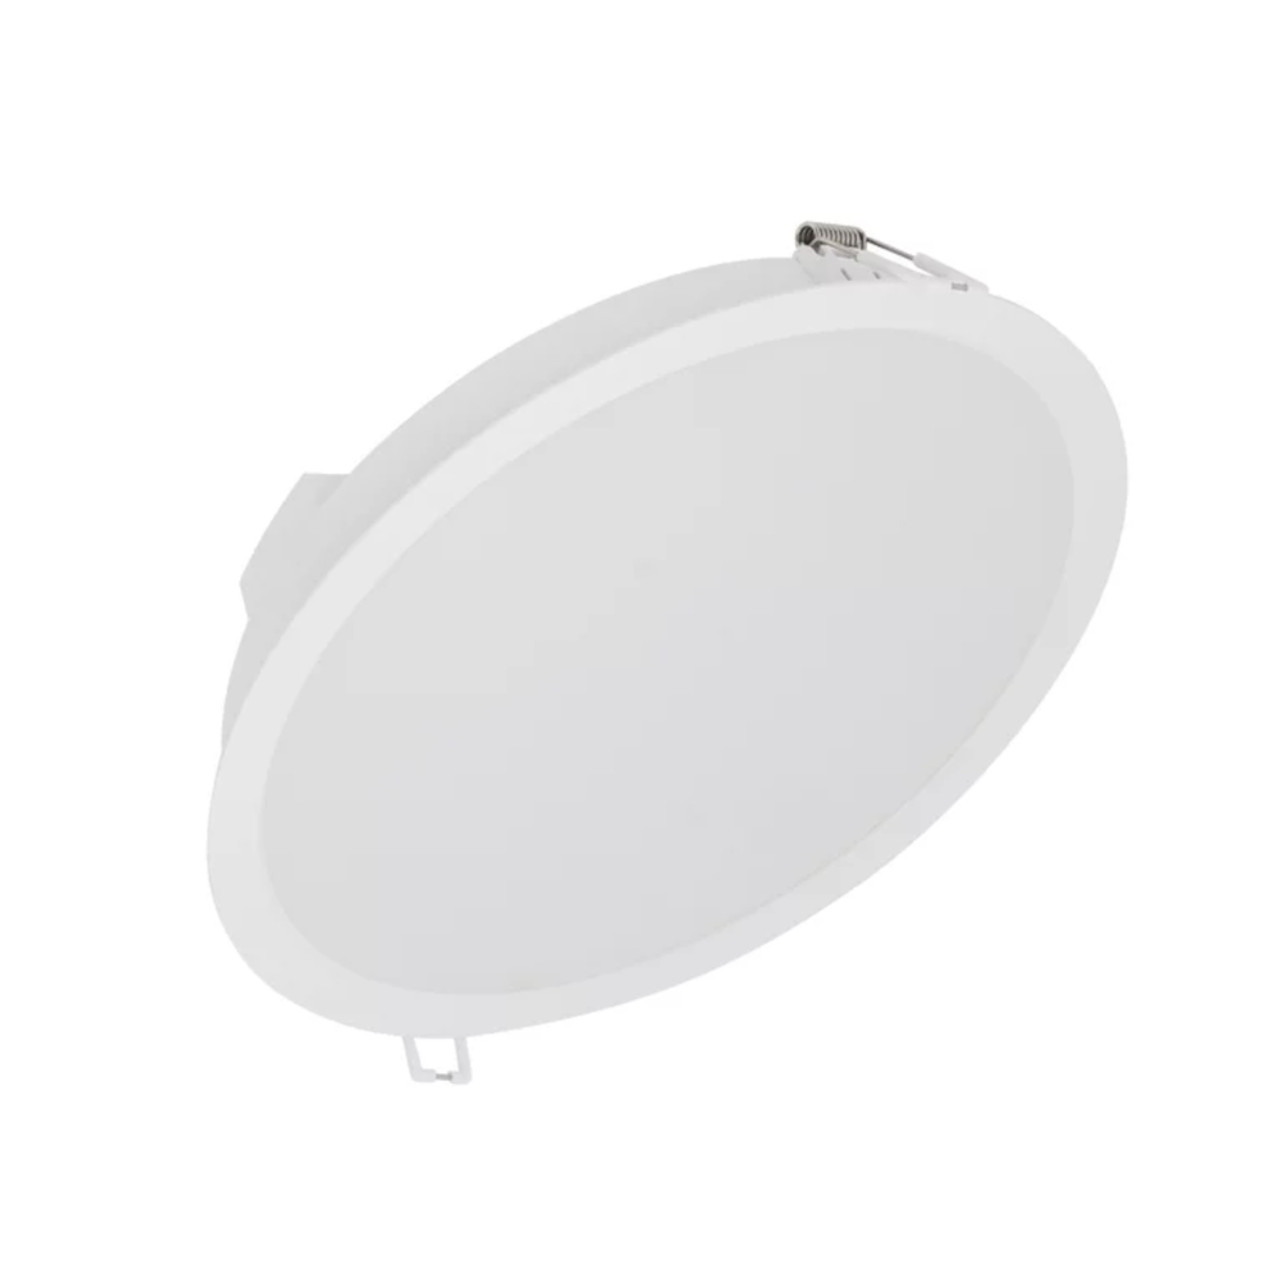 LED Downlight 30W 3000lm 4000K IP44 100 Degrees 200mm Cut Out Ledvance